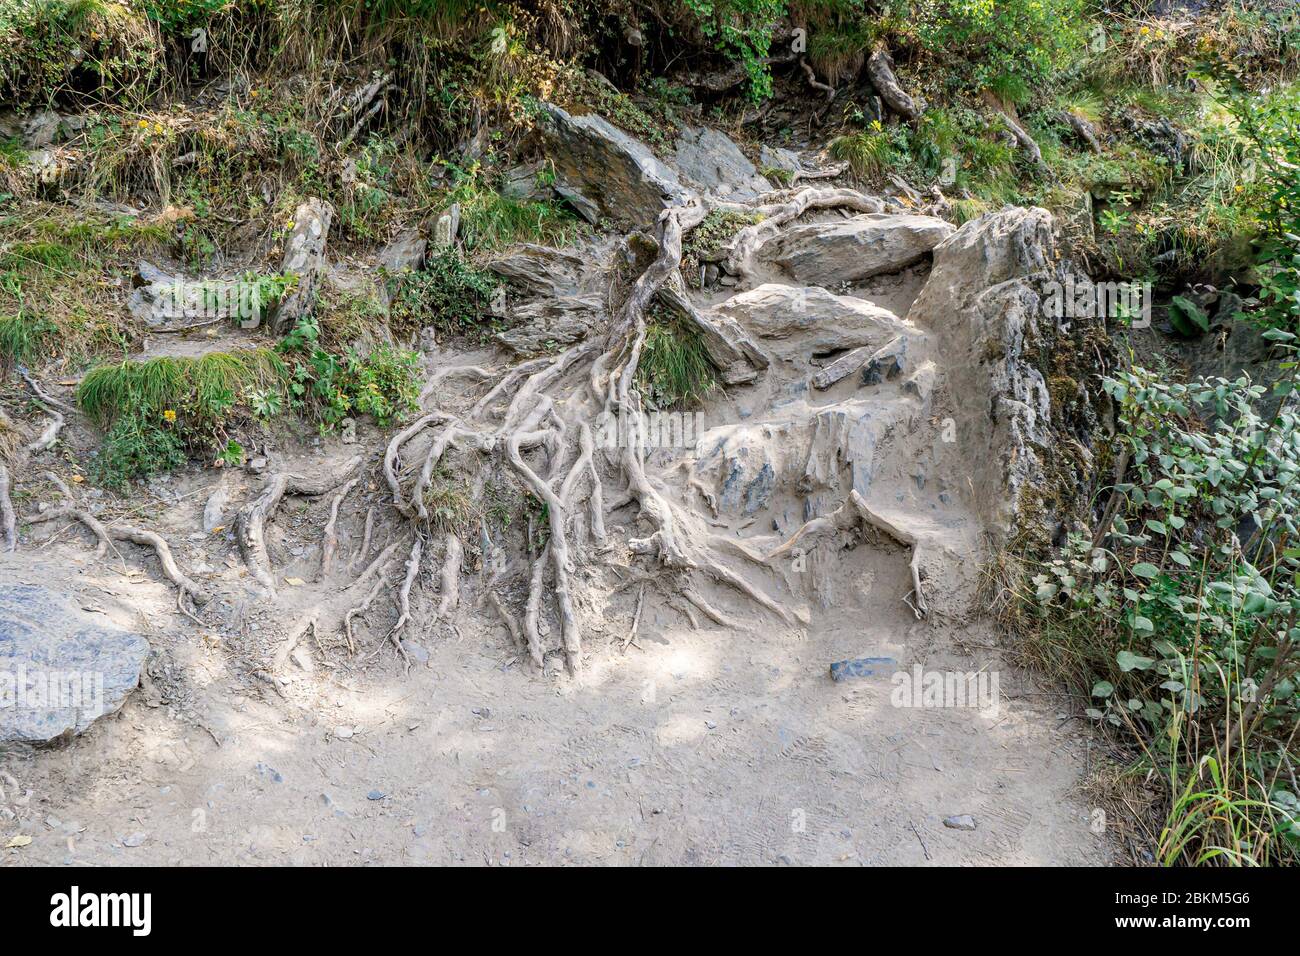 root system of a tree growing in rocky terrain, selective focus Stock Photo